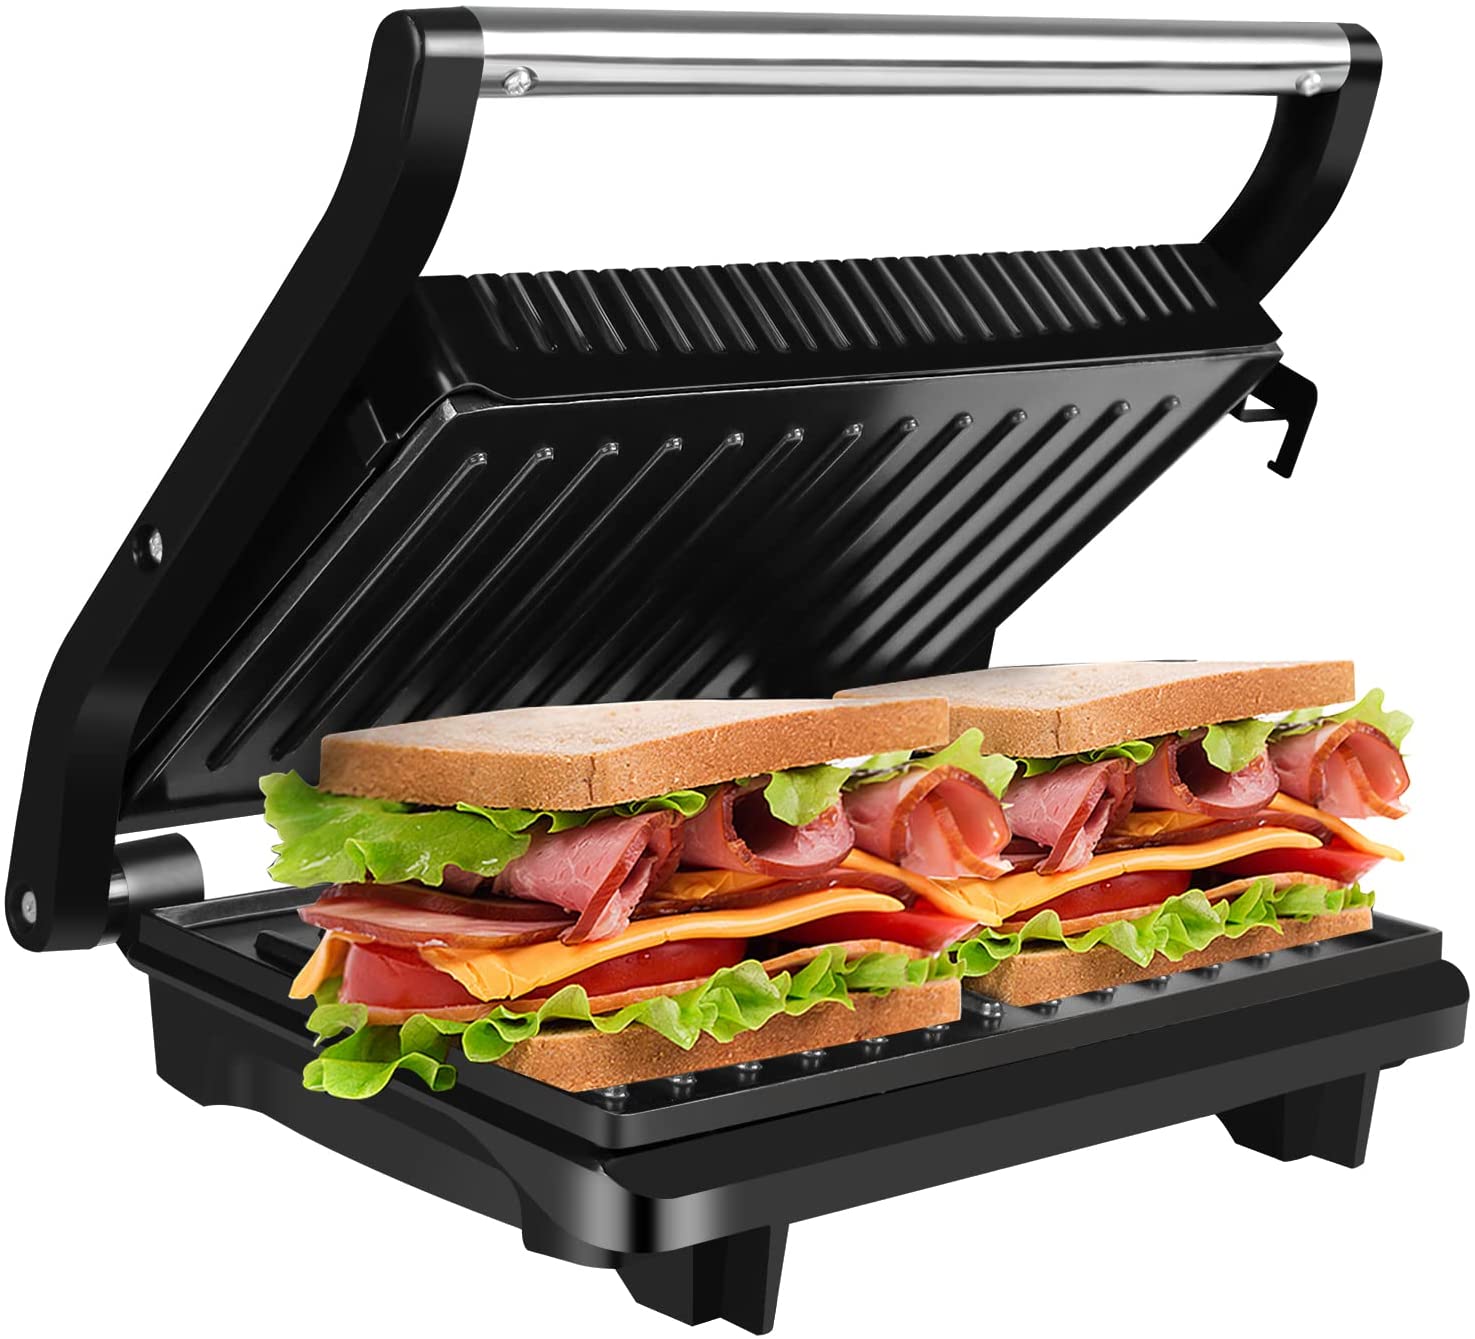 Gotoll Contact Grill Table Grill, Panini & Sandwich Maker, Double Grill Plates, Open 180° Contact Grill, 1000 W, Non-Stick Coating, Insulated Handles, Stainless Steel Housing